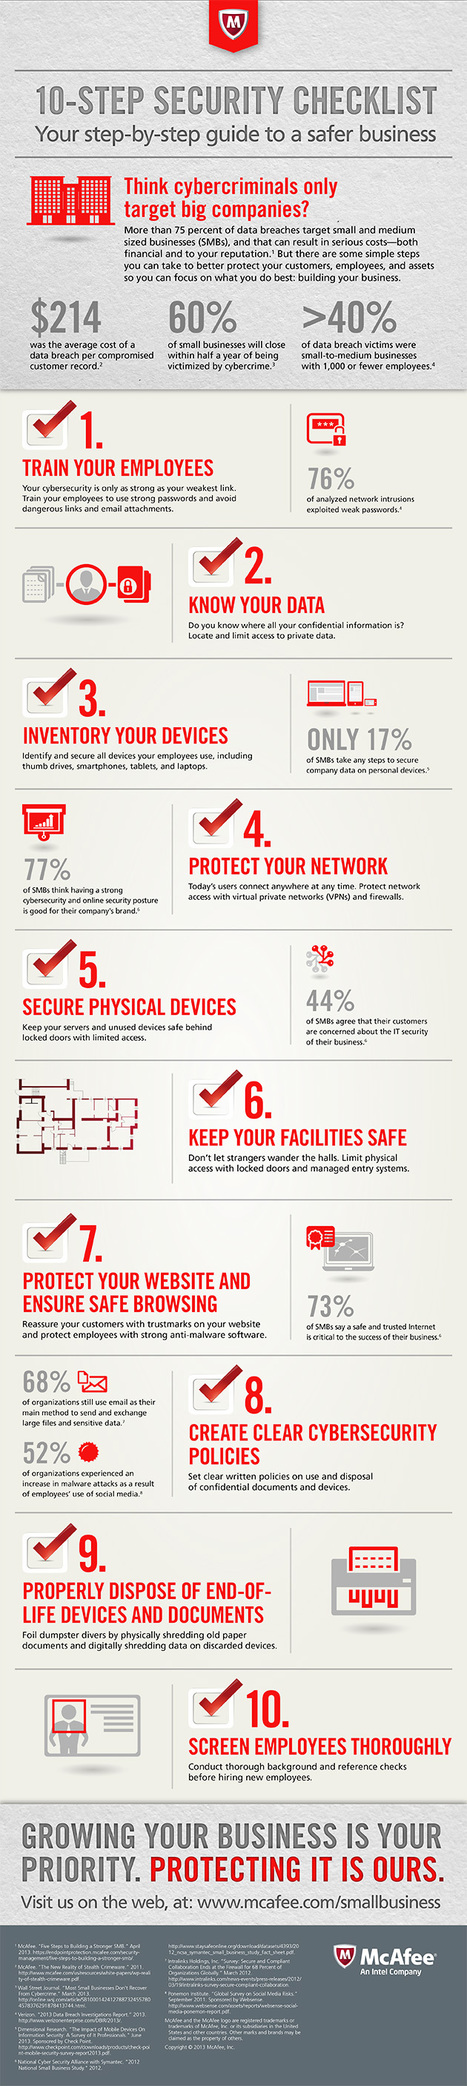 How to keep your business safe – the one checklist all SMBs should have [Infographic] | ICT Security-Sécurité PC et Internet | Scoop.it